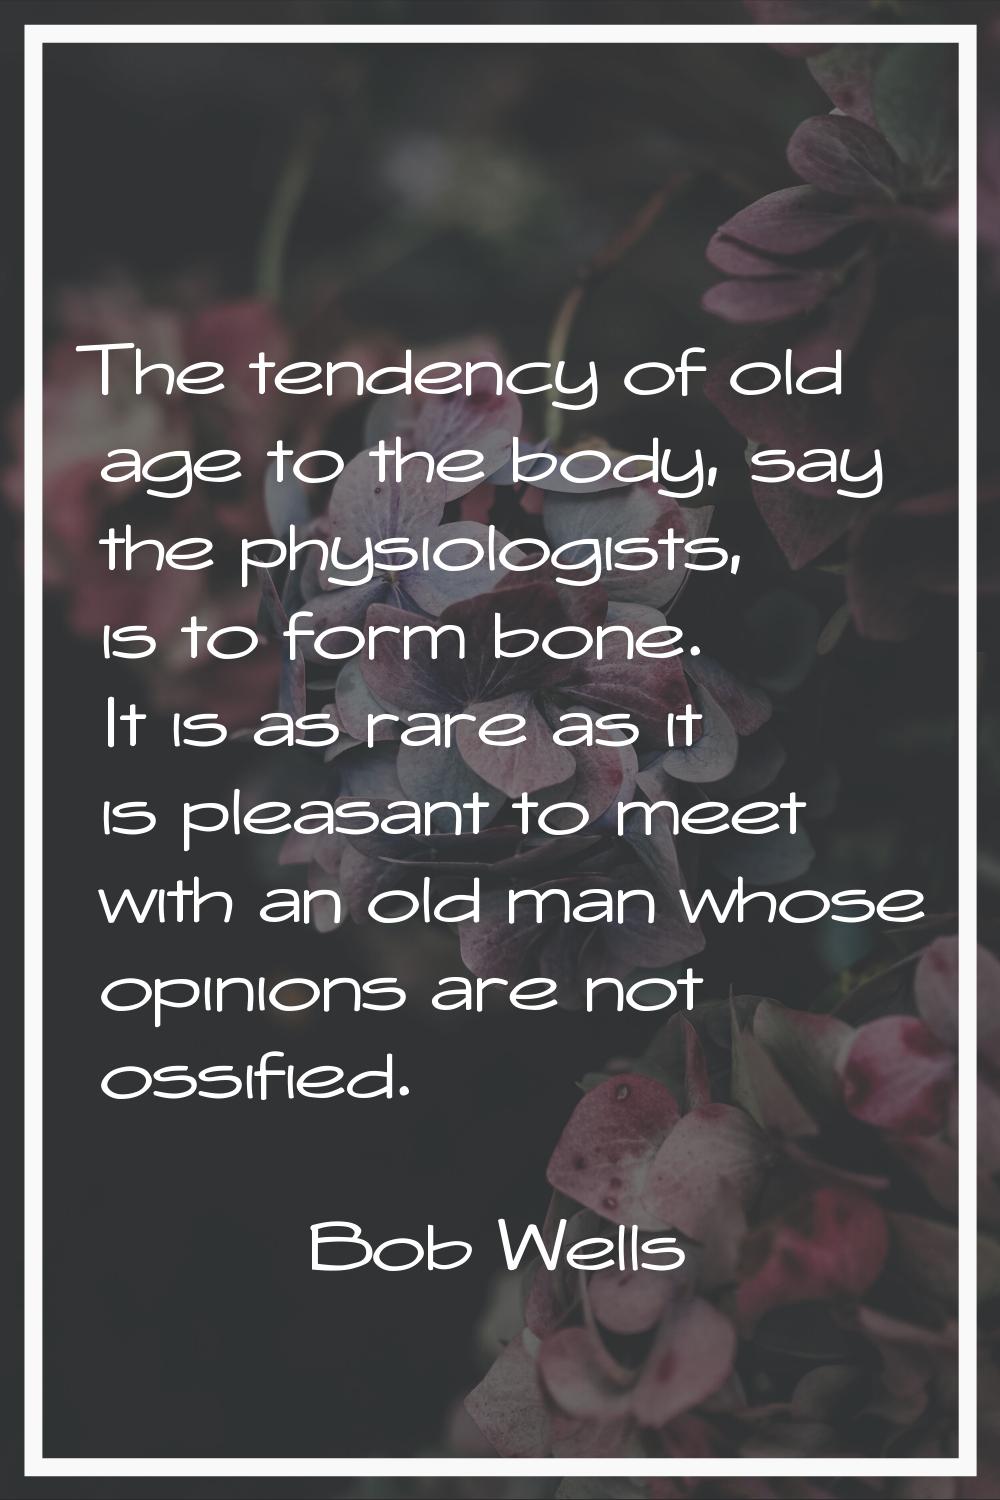 The tendency of old age to the body, say the physiologists, is to form bone. It is as rare as it is